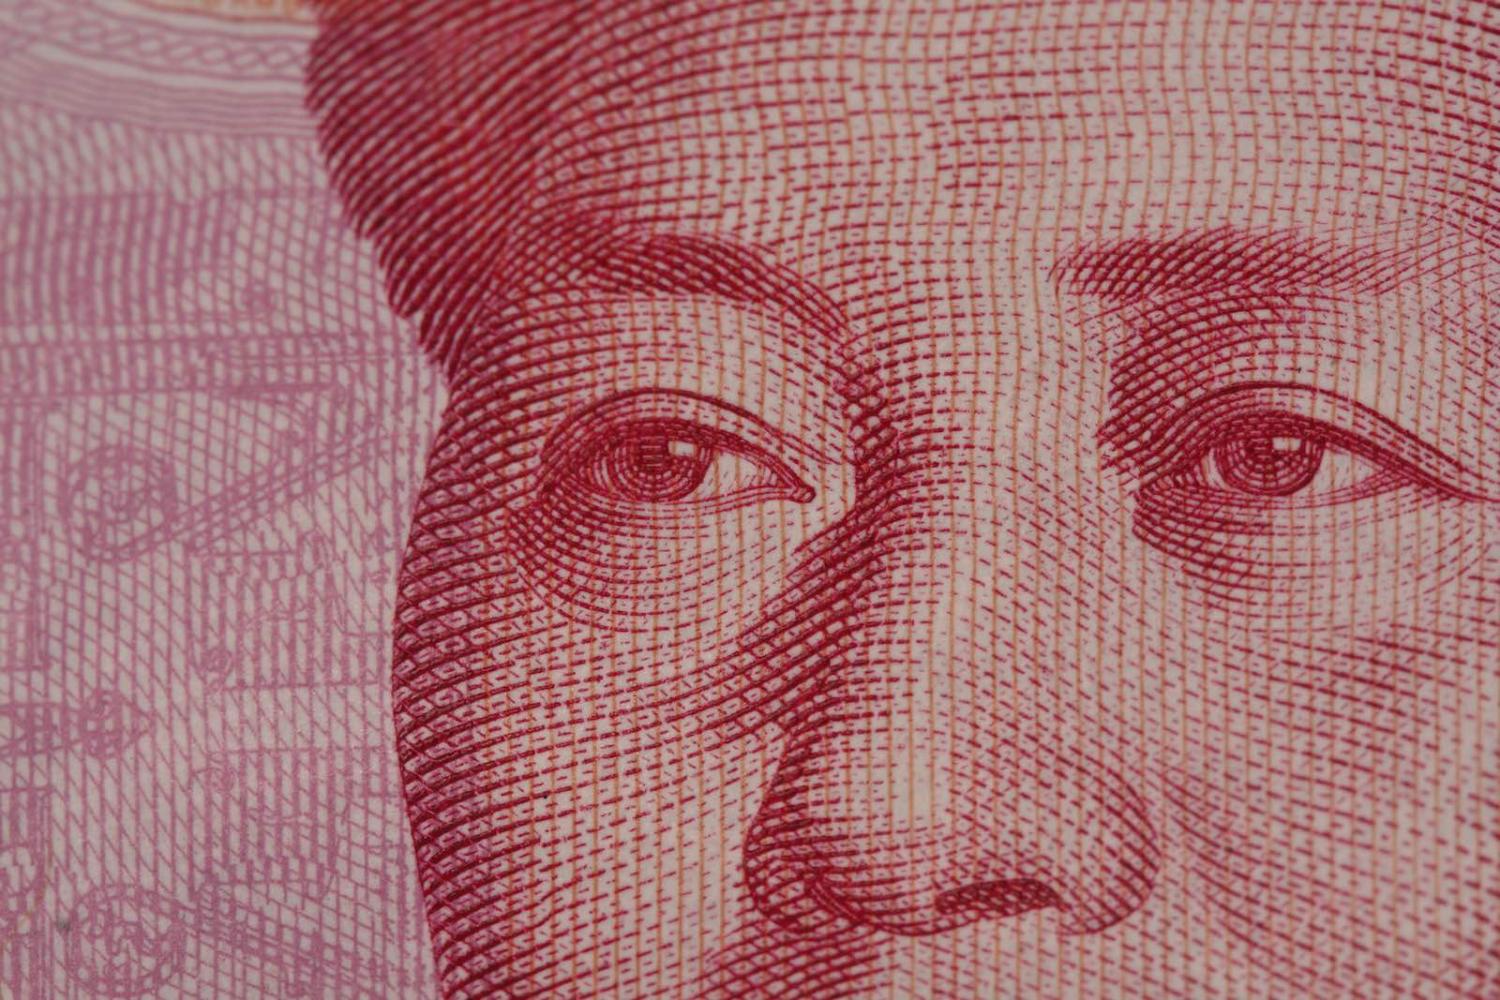 China was a currency manipulator in the first decade of this century, running a huge current account surplus to build up foreign exchange reserves (Photo: David Dennis/Flickr)